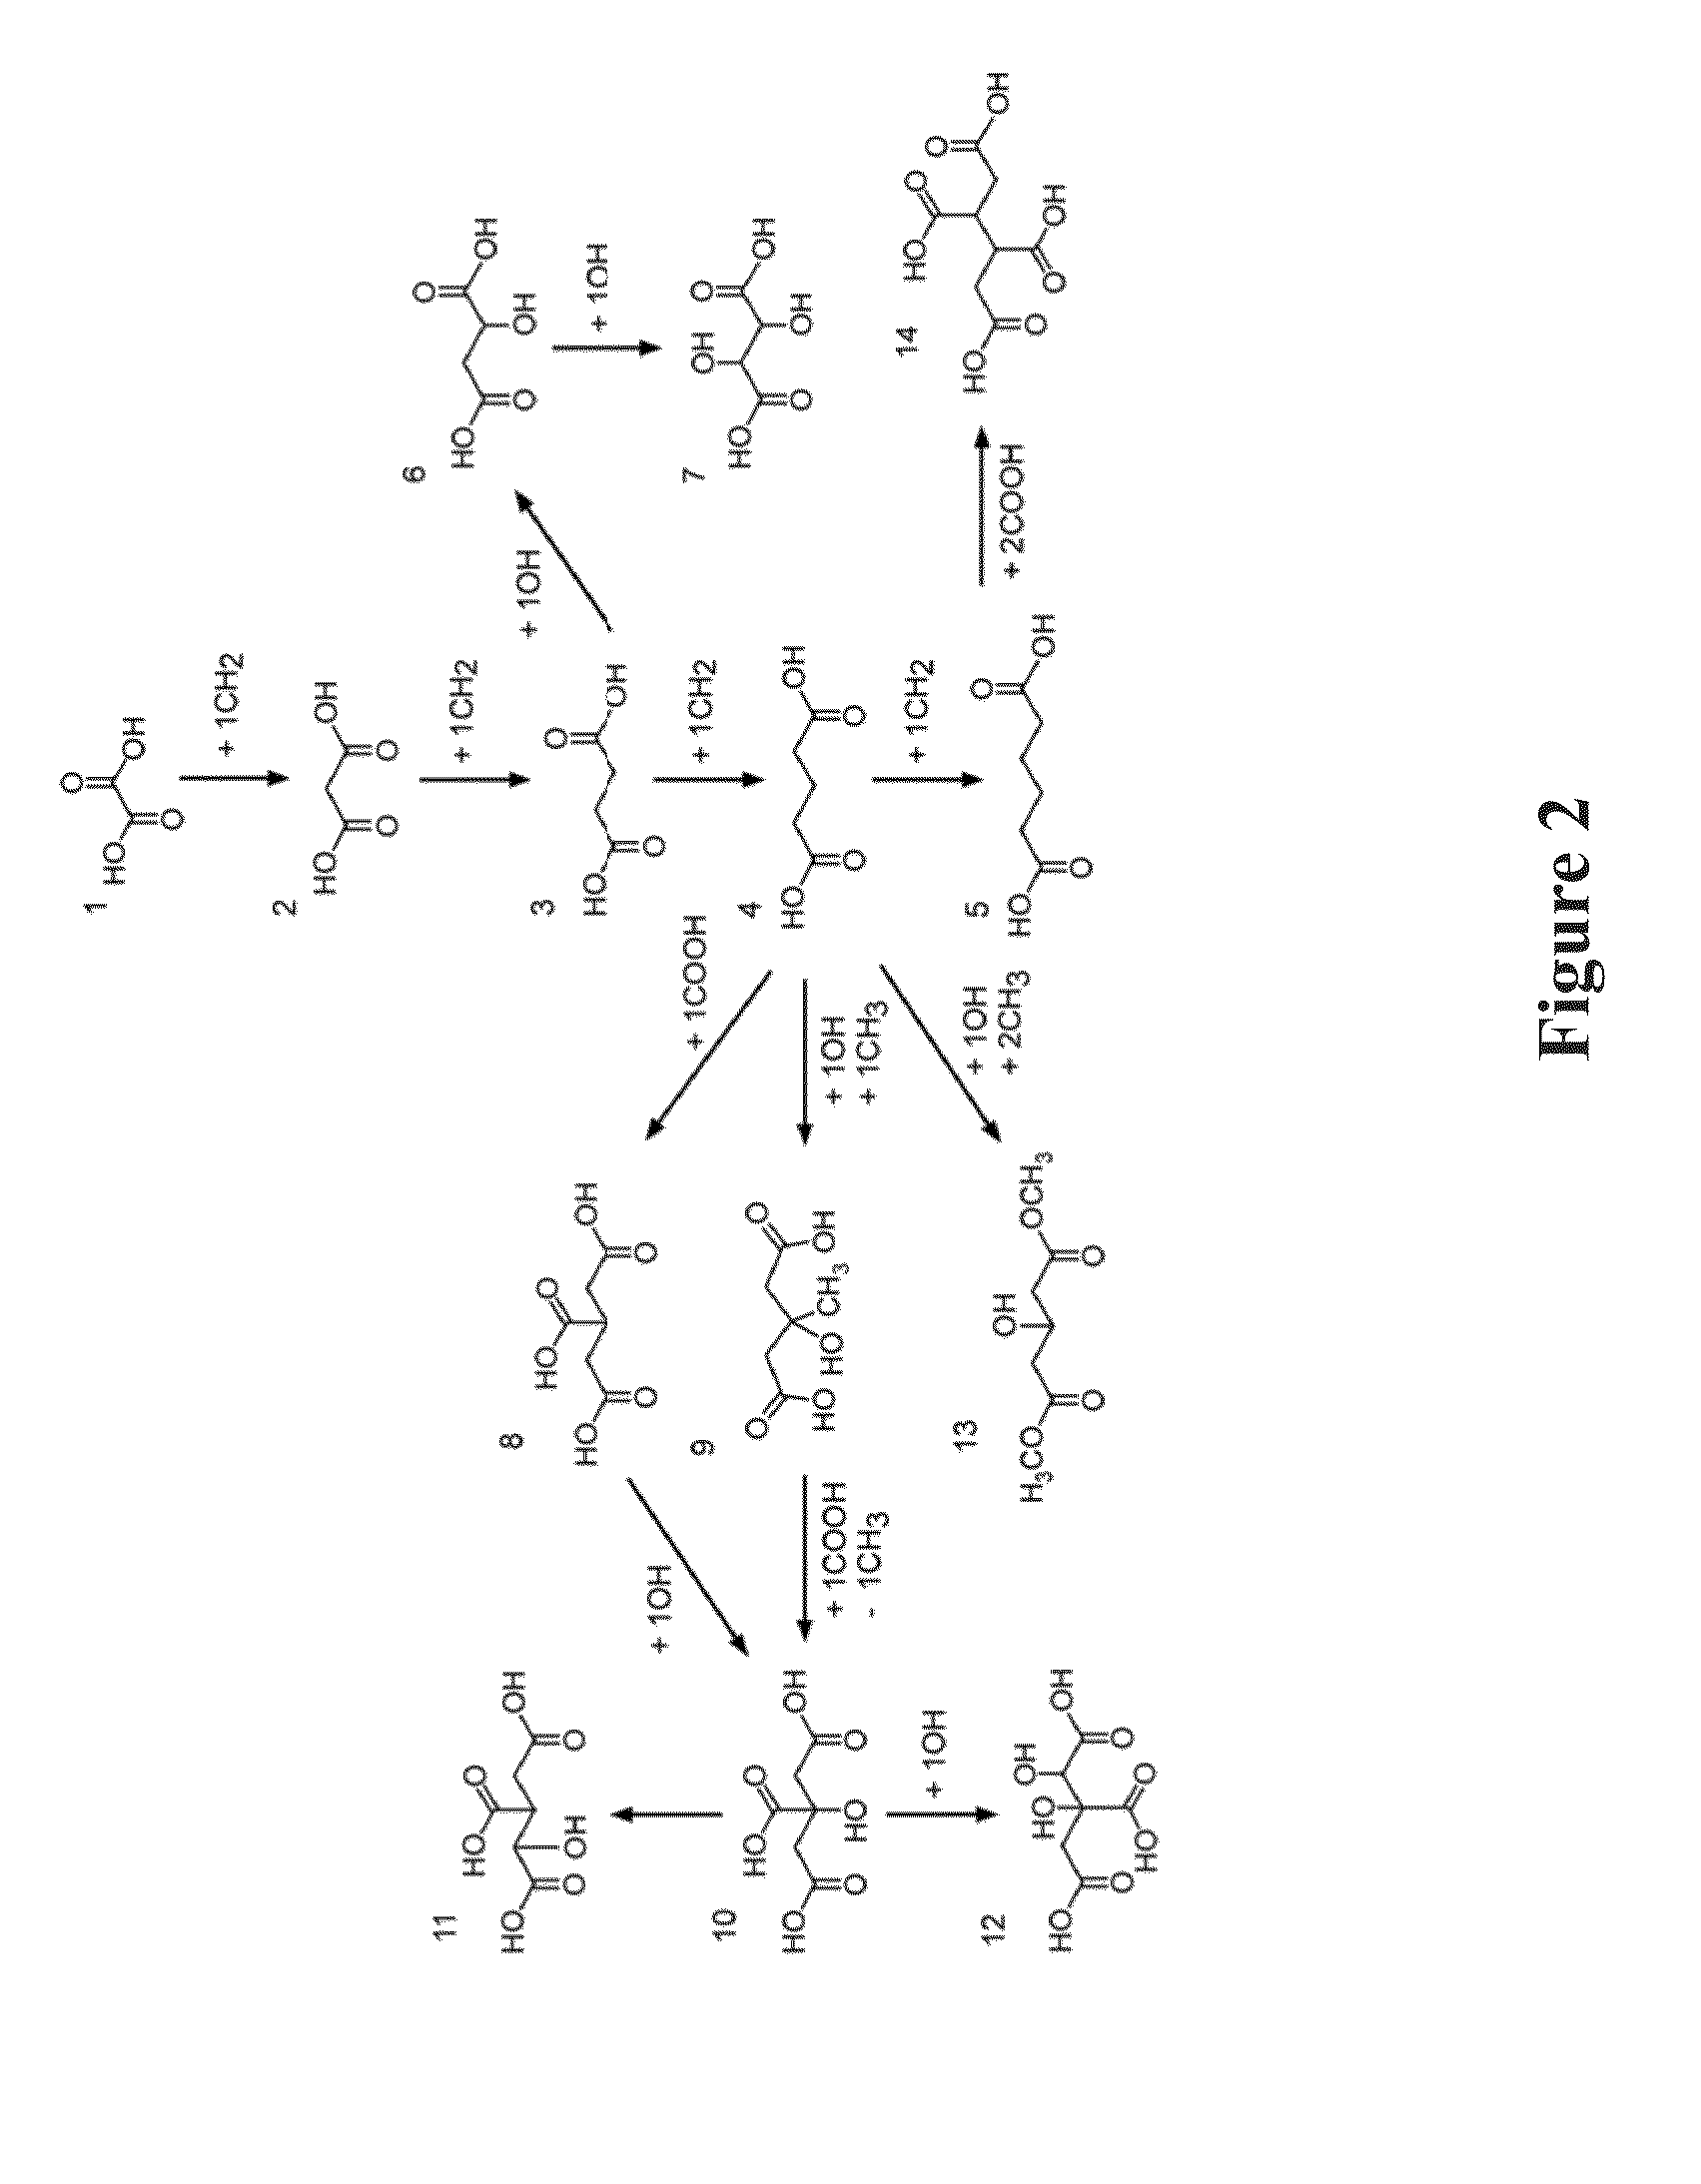 Organic acids as growth inhibitors of pathological calcification and uses thereof